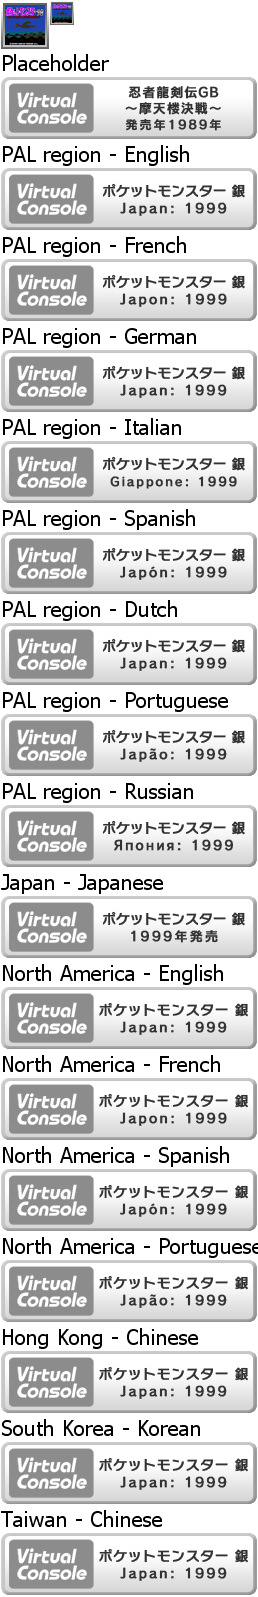 Virtual Console - Pocket Monsters Gin